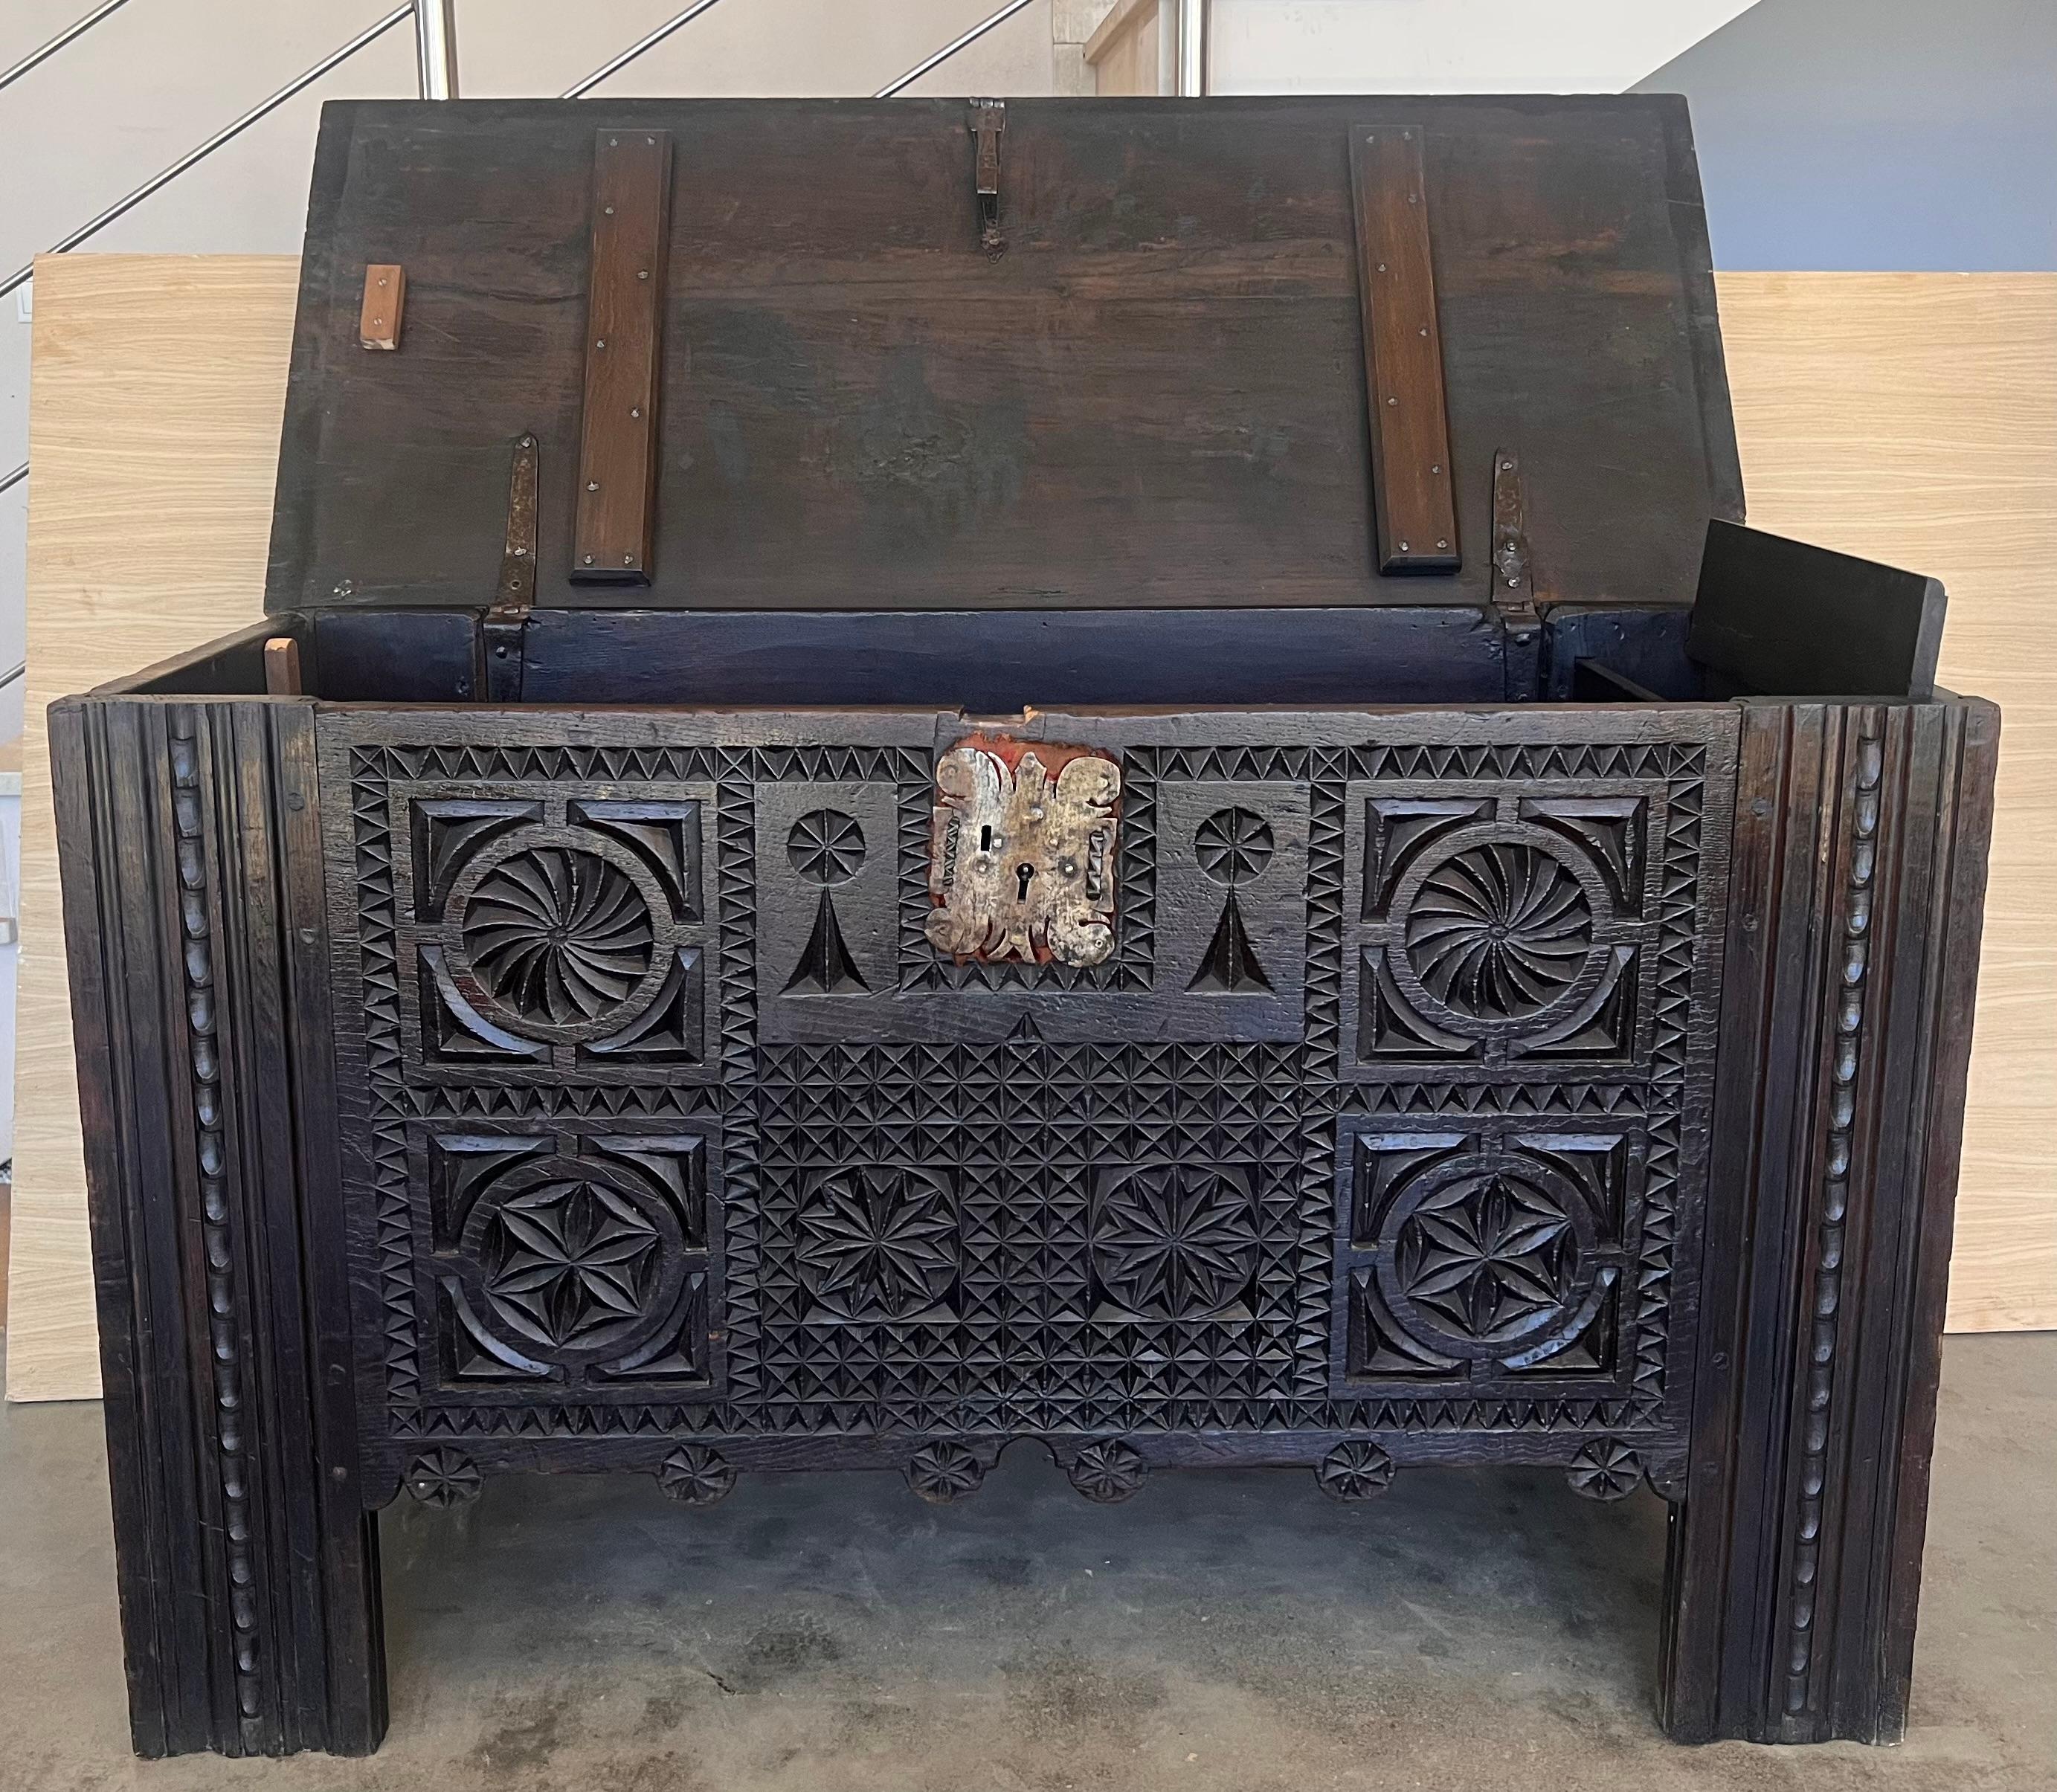 Iron Antique Carved Walnut Large Kutxa Trunk from the Basque Country, Early 1800s For Sale